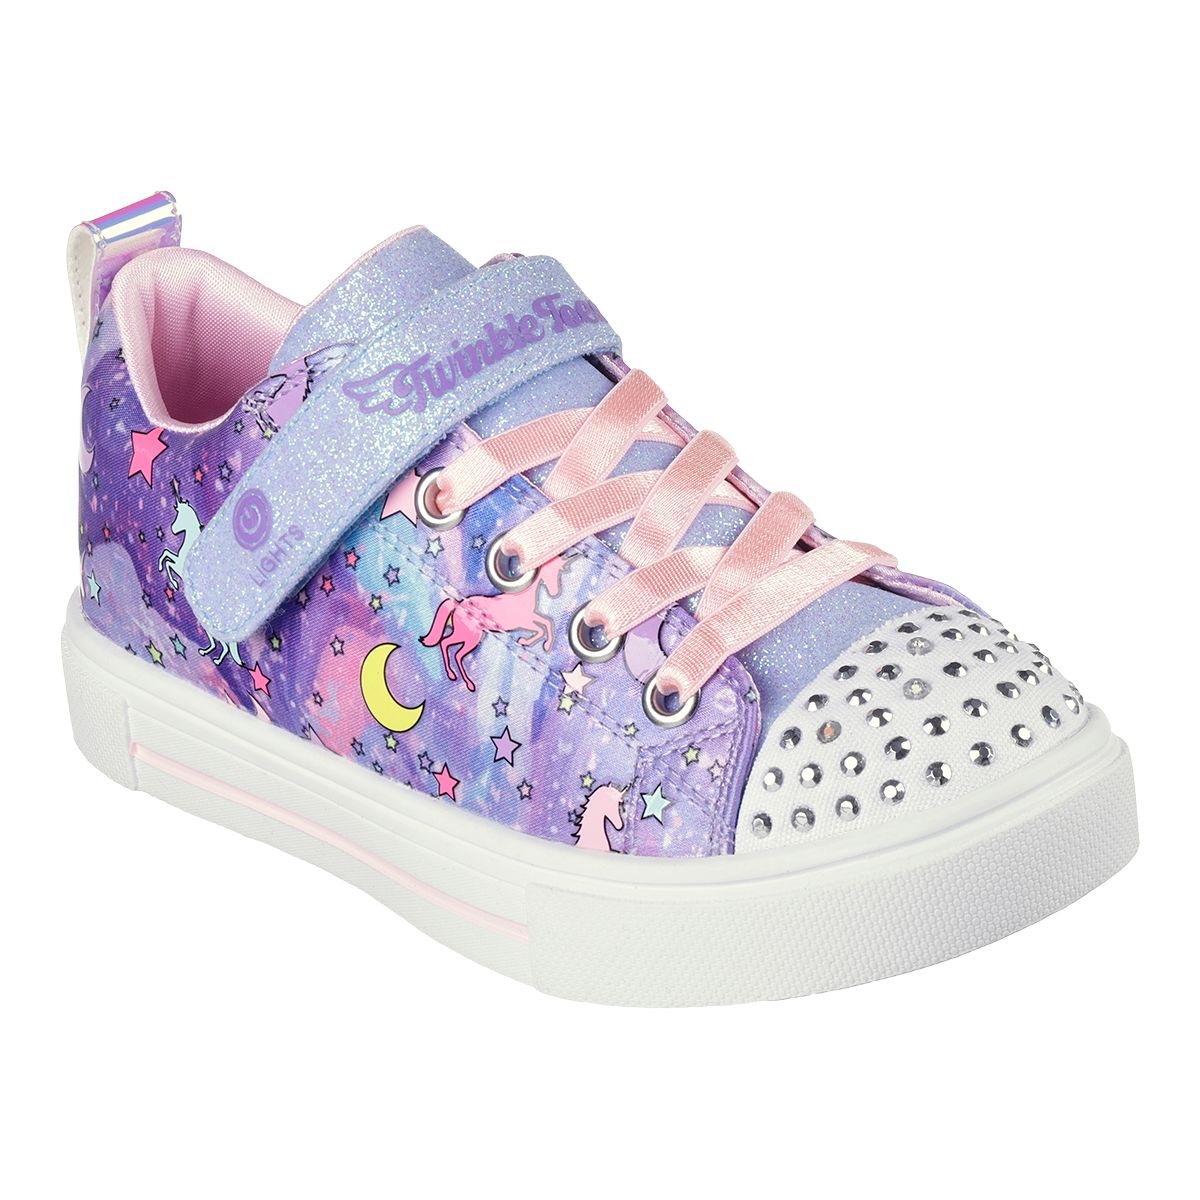 Skechers Girls' Twinkle Toes Twinkle Sparks - Unicorn Dreaming Shoes ...